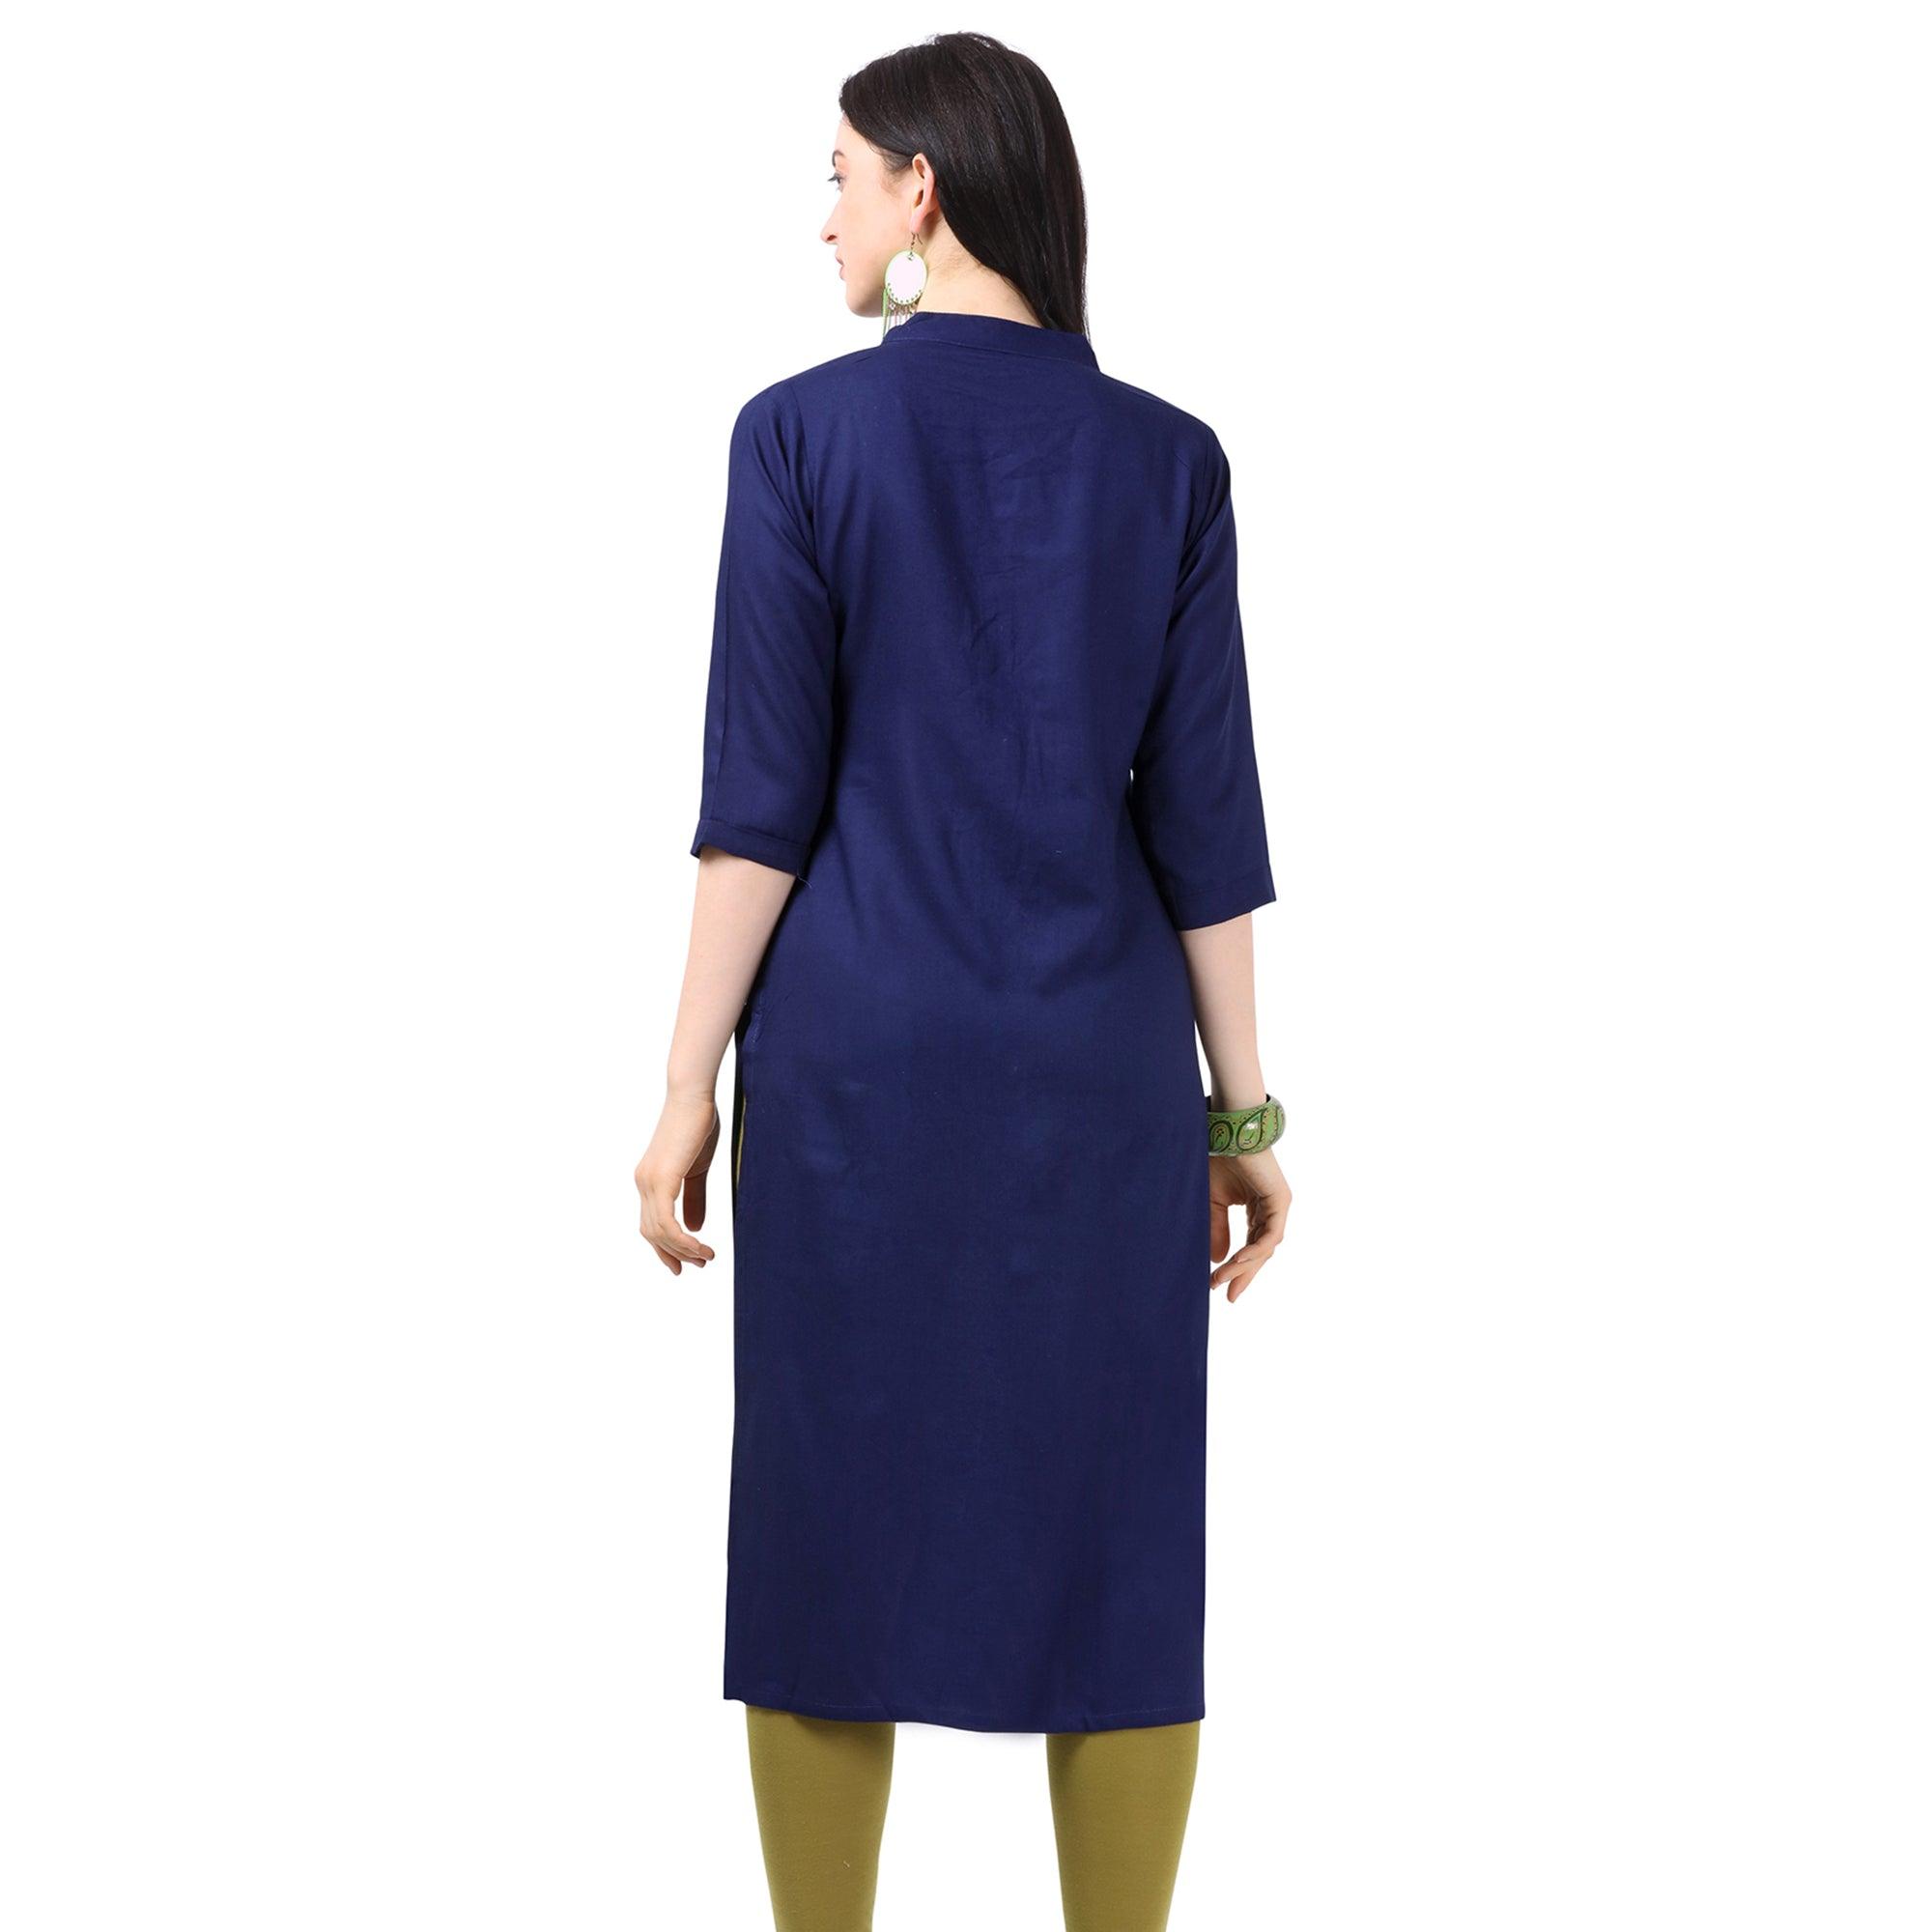 Engrossing Navy Blue Colored Partywear Embroidered Rayon Kurti - Peachmode